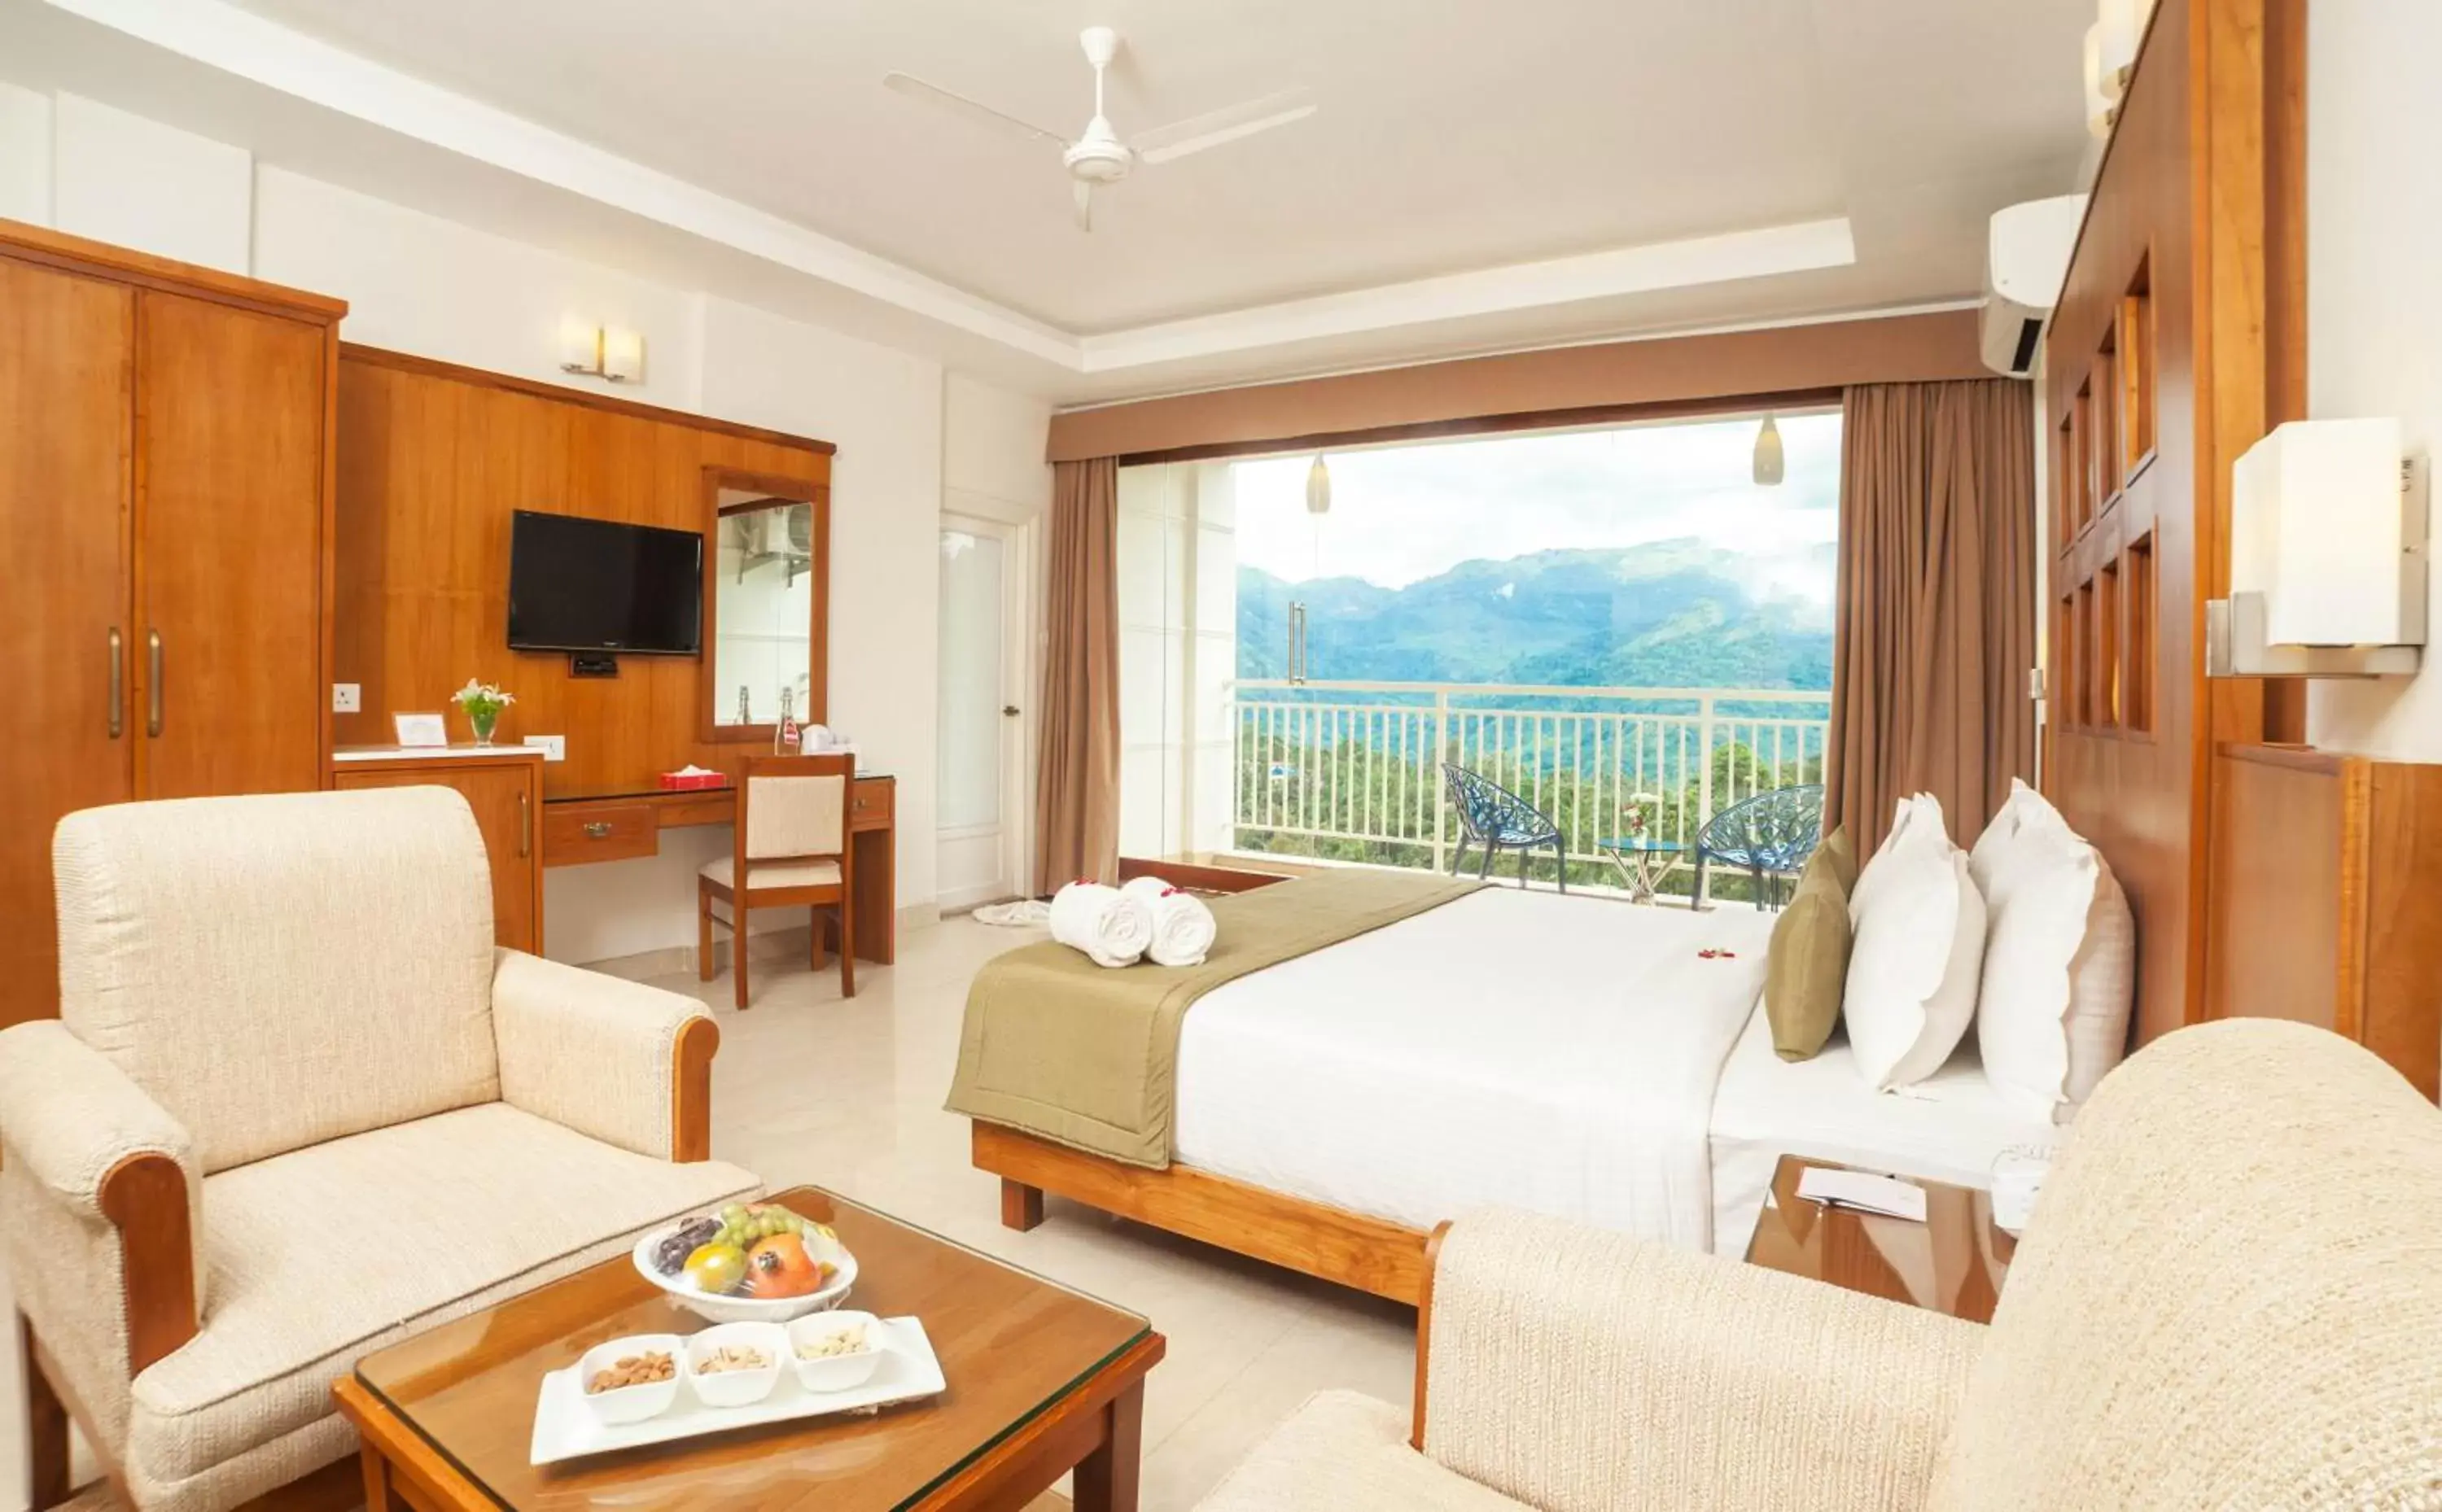 Bed, Room Photo in The Fog Munnar (Resort & Spa)